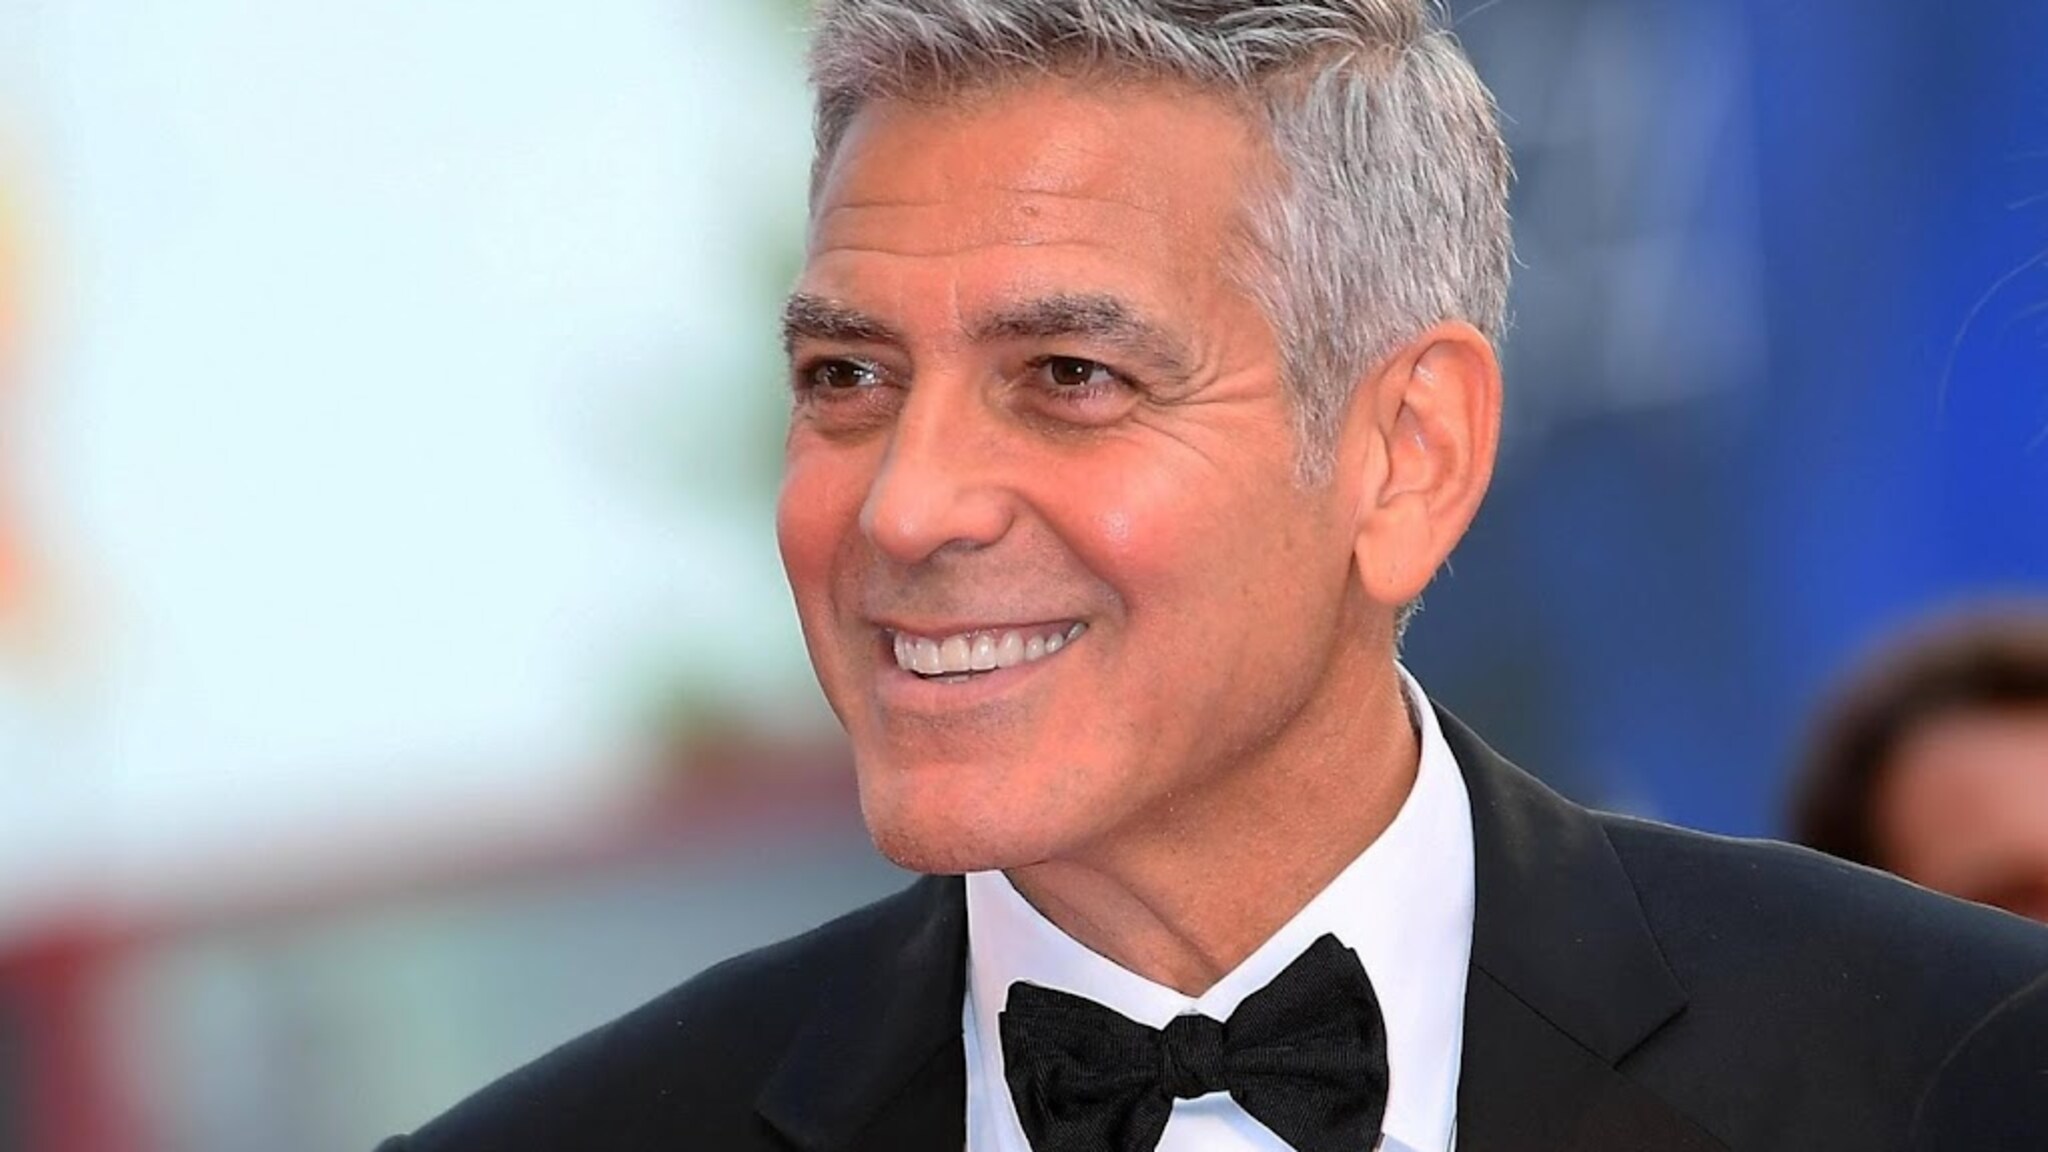 Residents claim that George Clooney is coming to live in this Dutch city